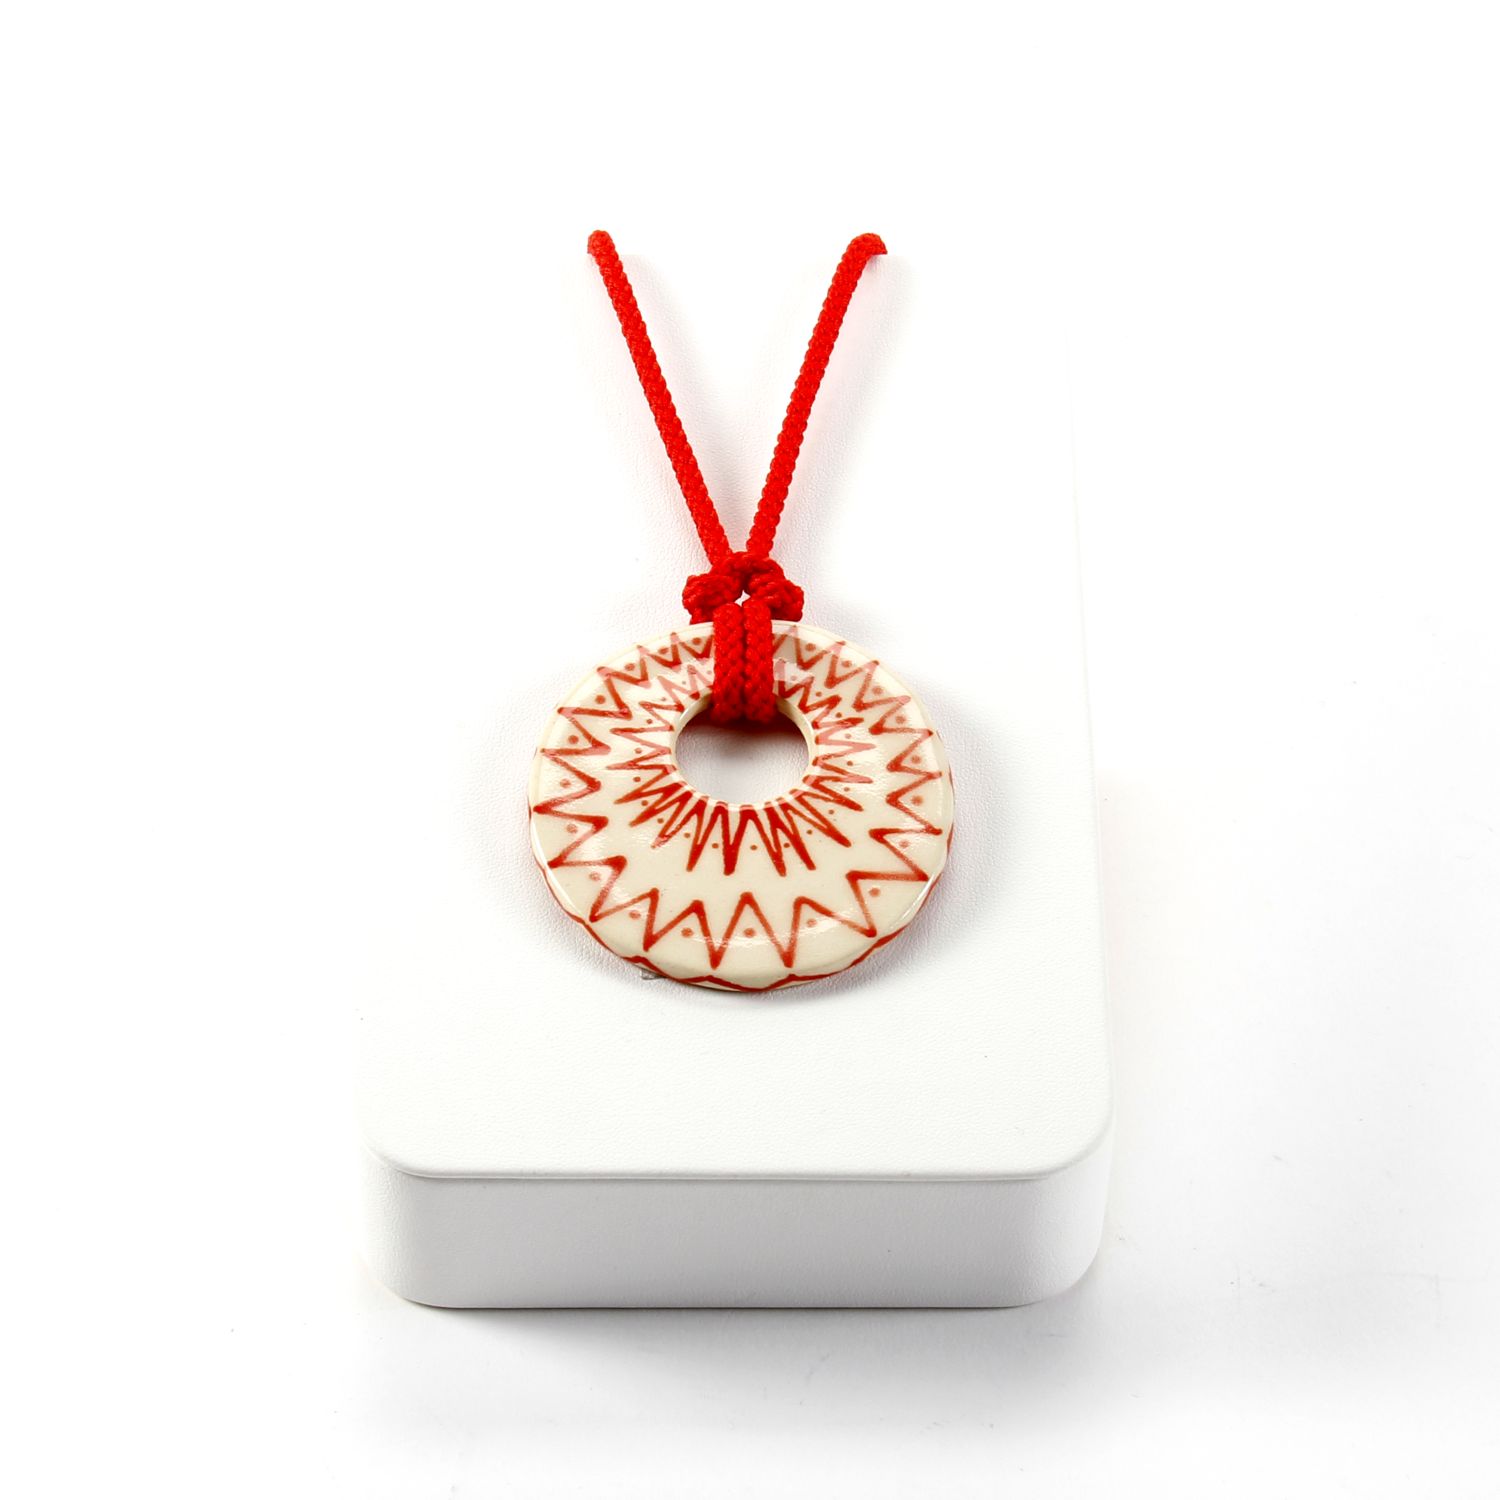 Here and Here: Zigzag Pendant Product Image 3 of 3